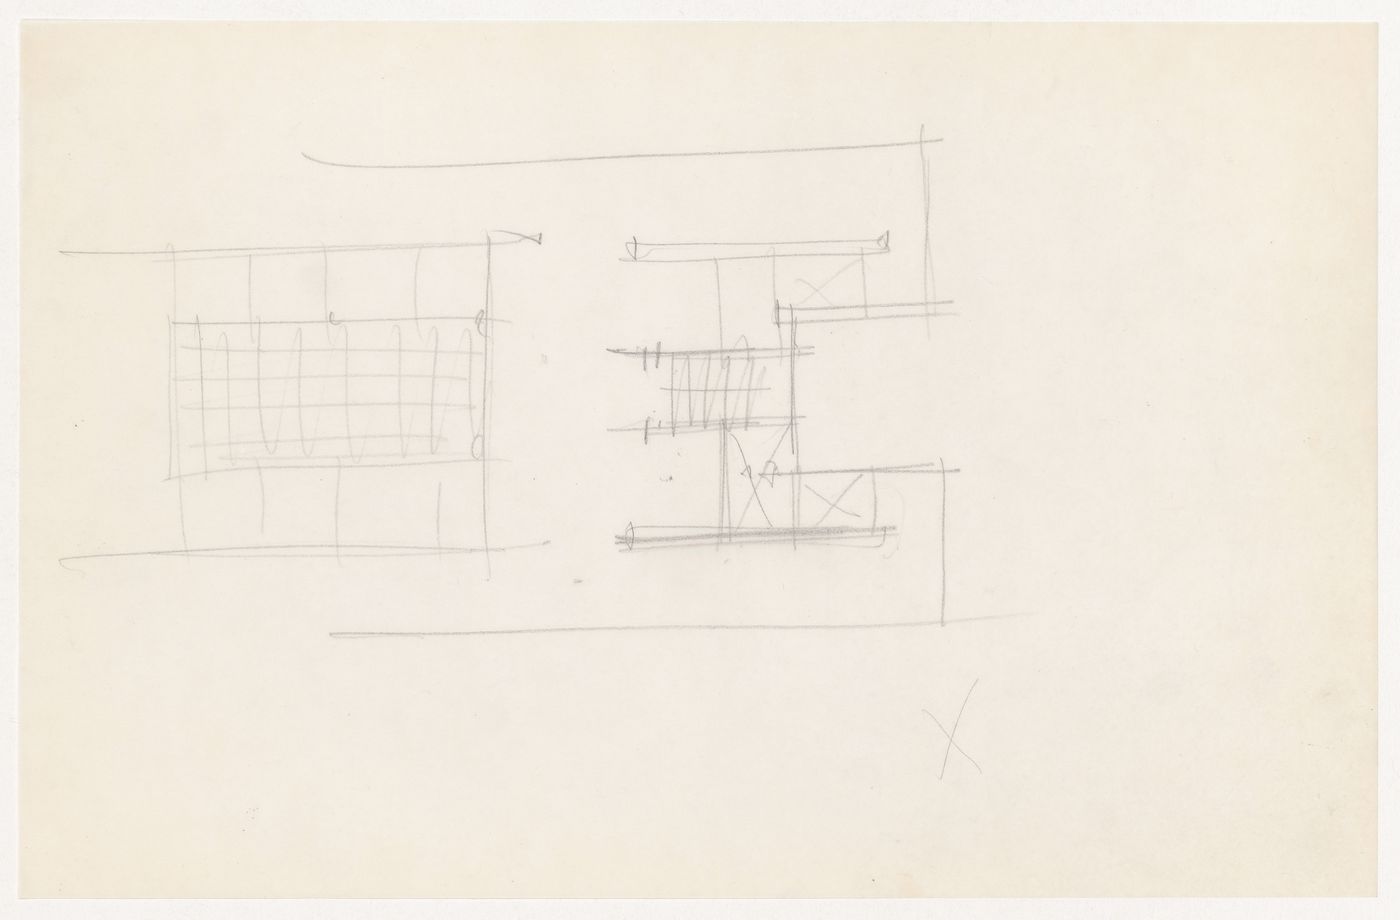 Partial sketch plan for the Metallurgy Building, Illinois Institute of Technology, Chicago